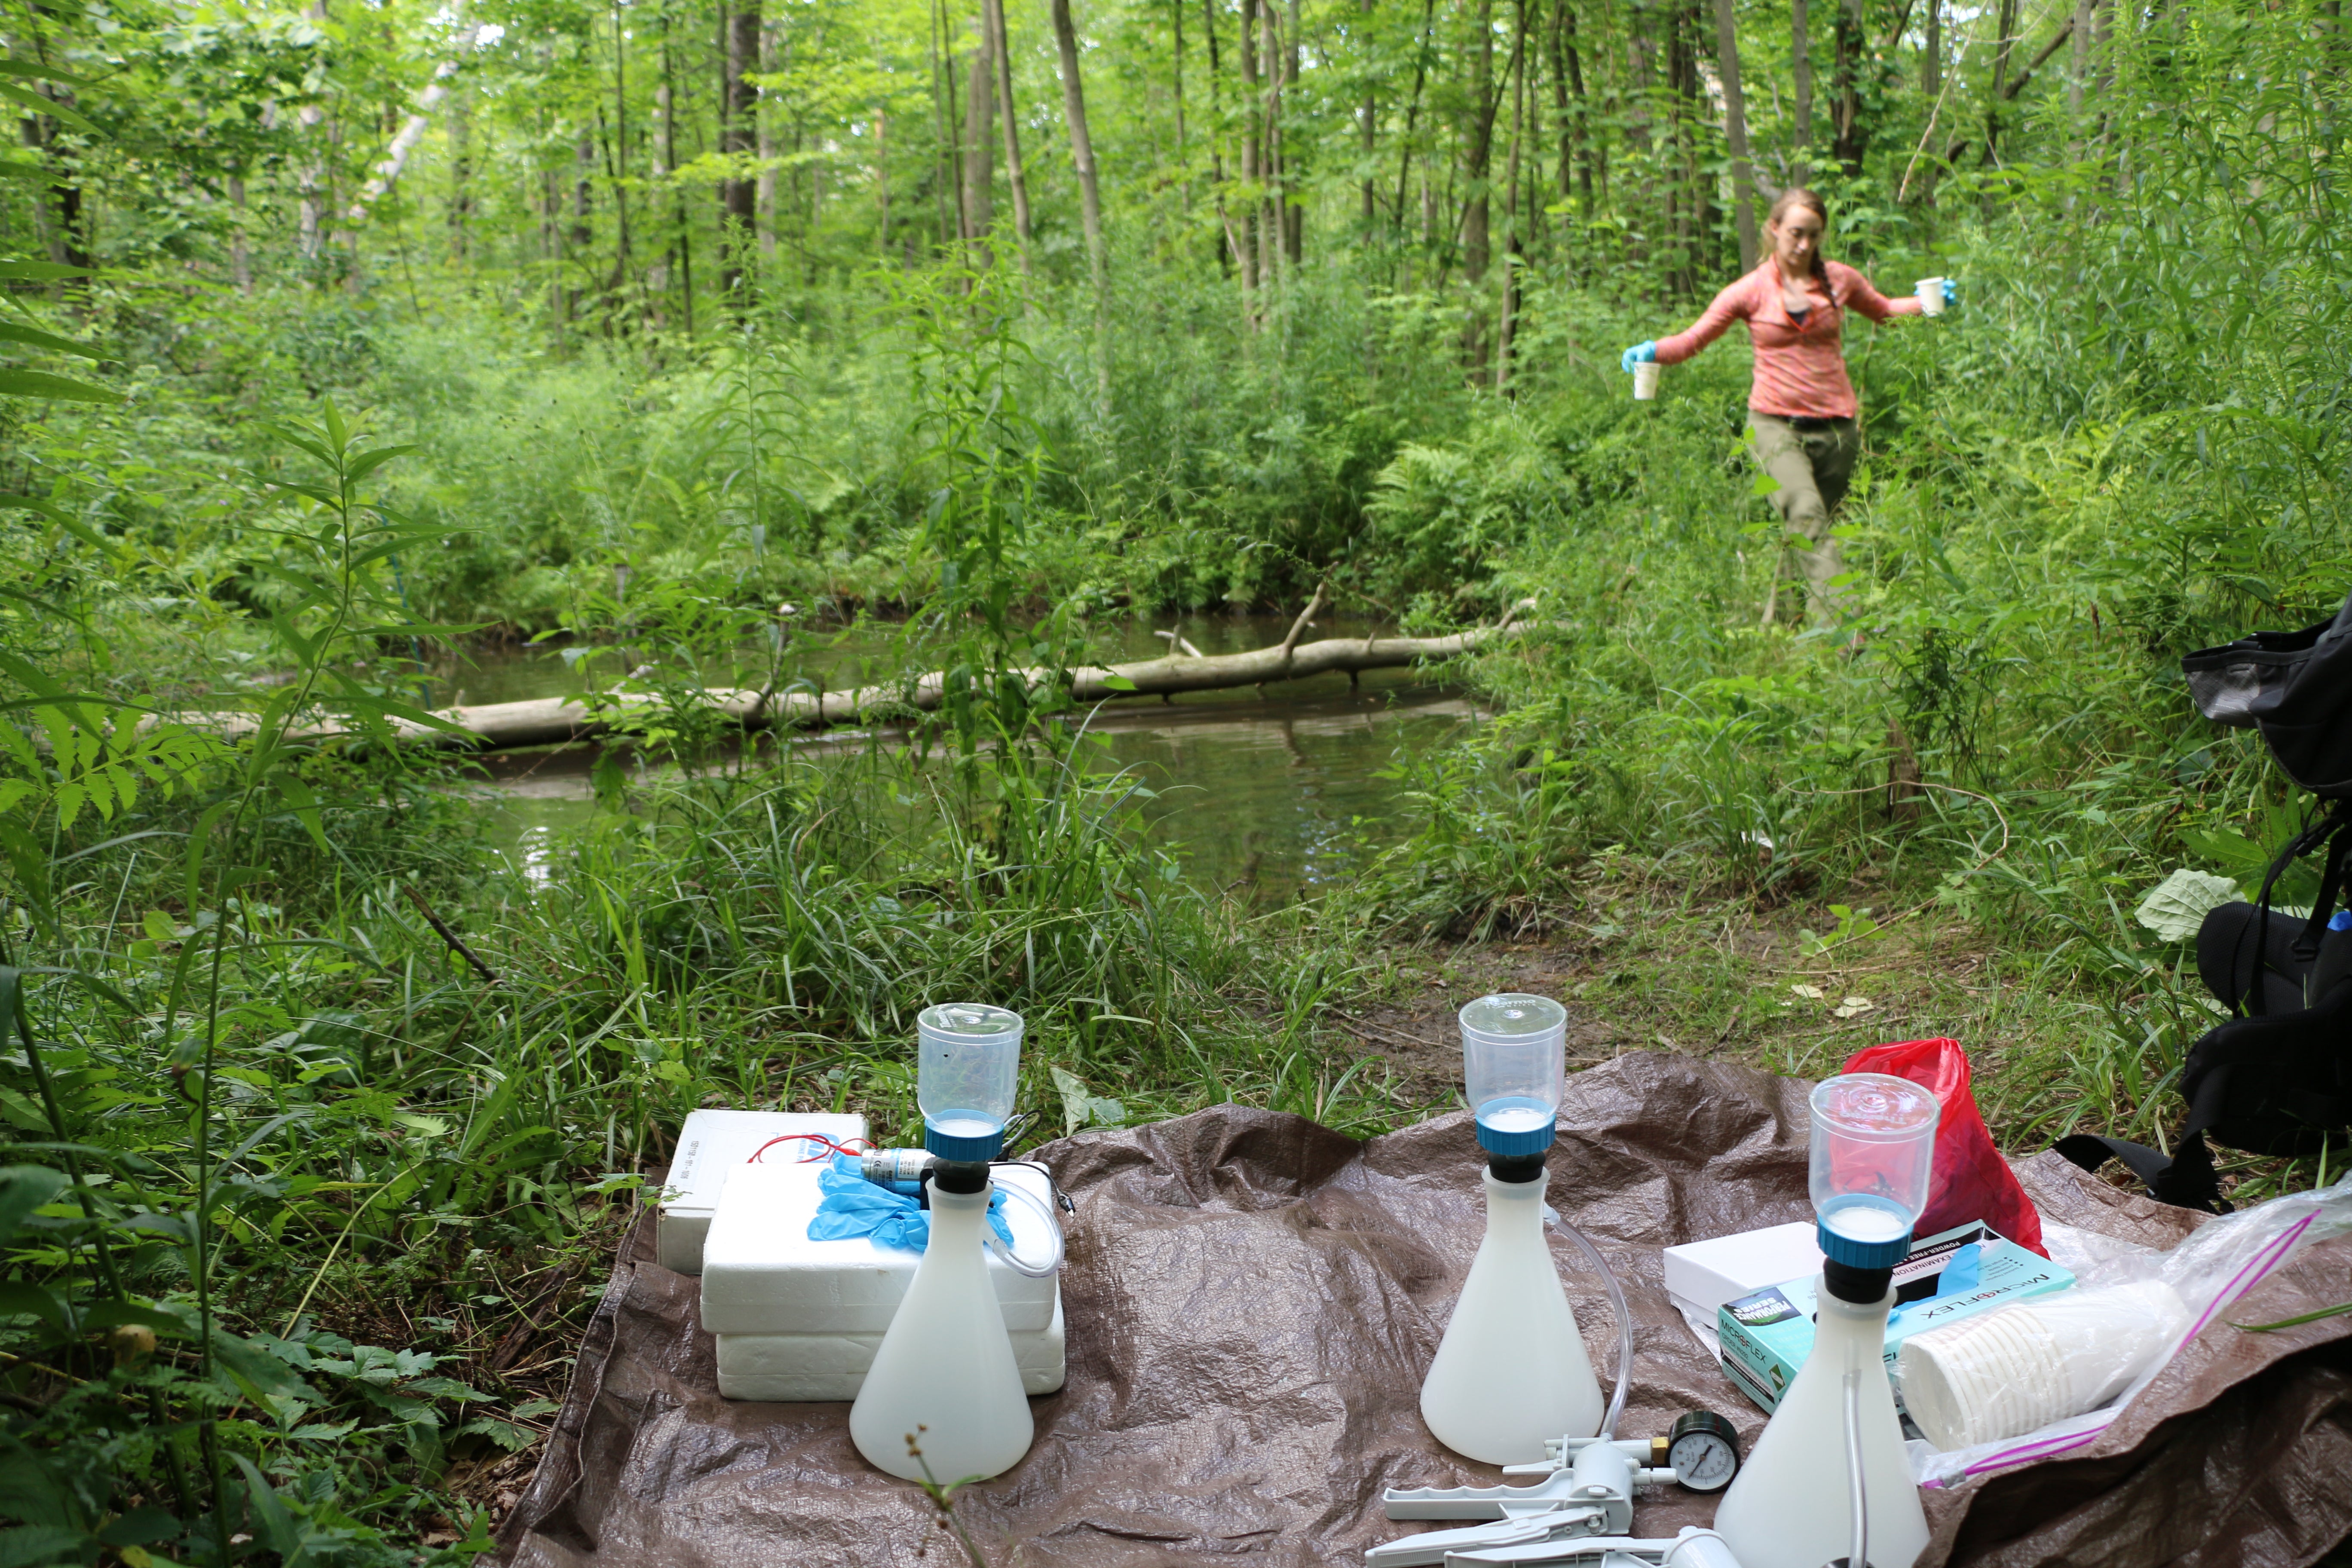 Photo of Alyssa Kaganer in a forest near a pond carrying water samples. In the image is lab equipment sitting on a brown tarp on the bank of a pond.